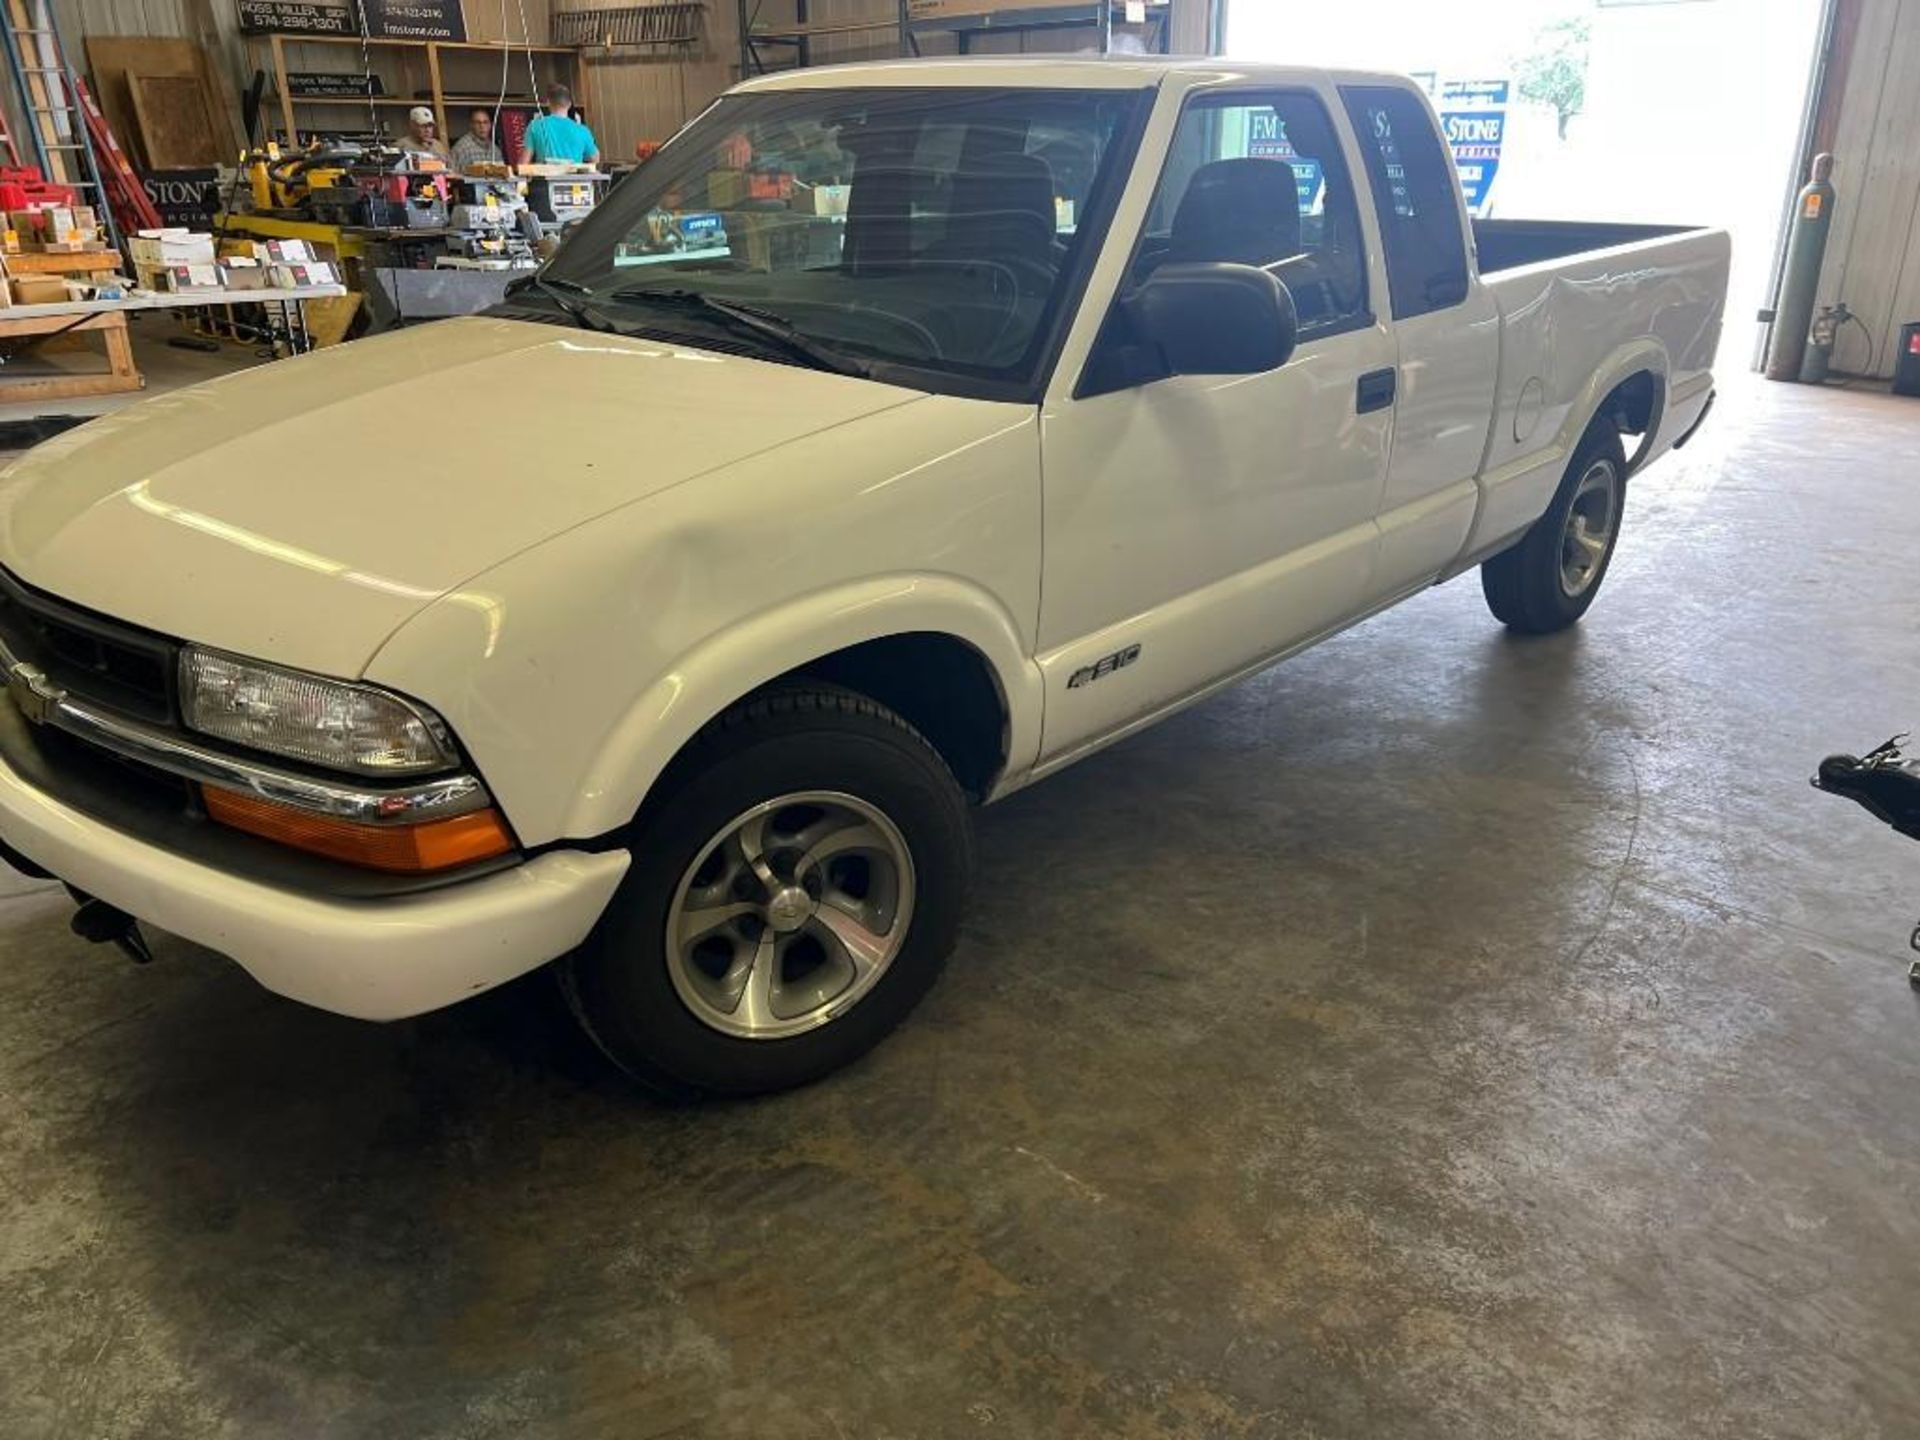 2002 Chevrolet S10 pick up truck. Extended cab. 4cyl.